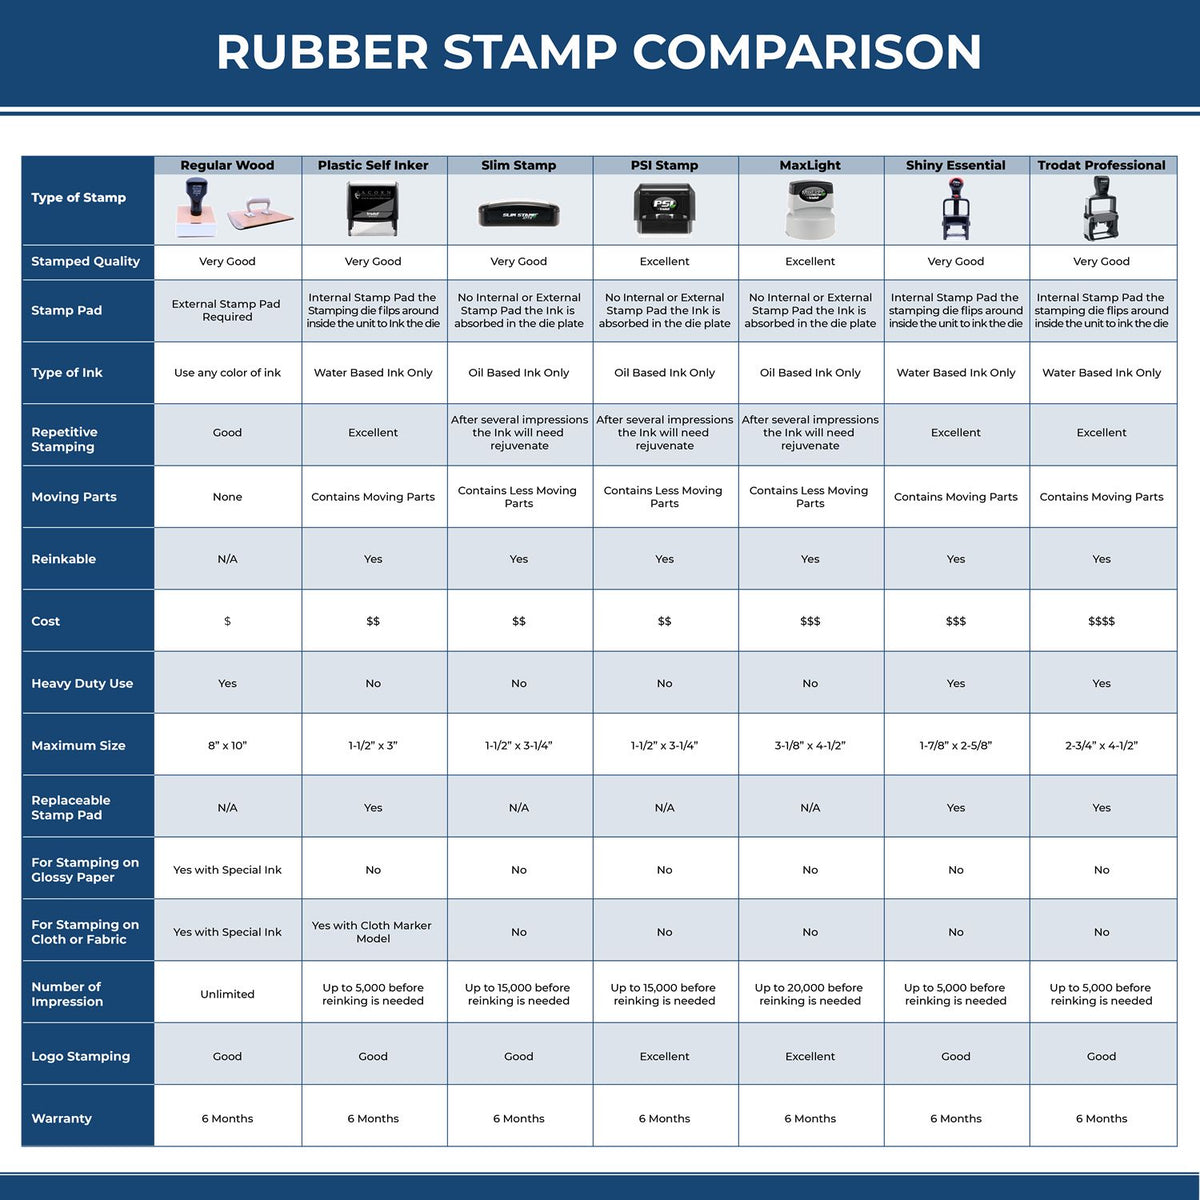 A comparison chart for the different types of mount models available for the Wooden Handle Nevada State Seal Notary Public Stamp.